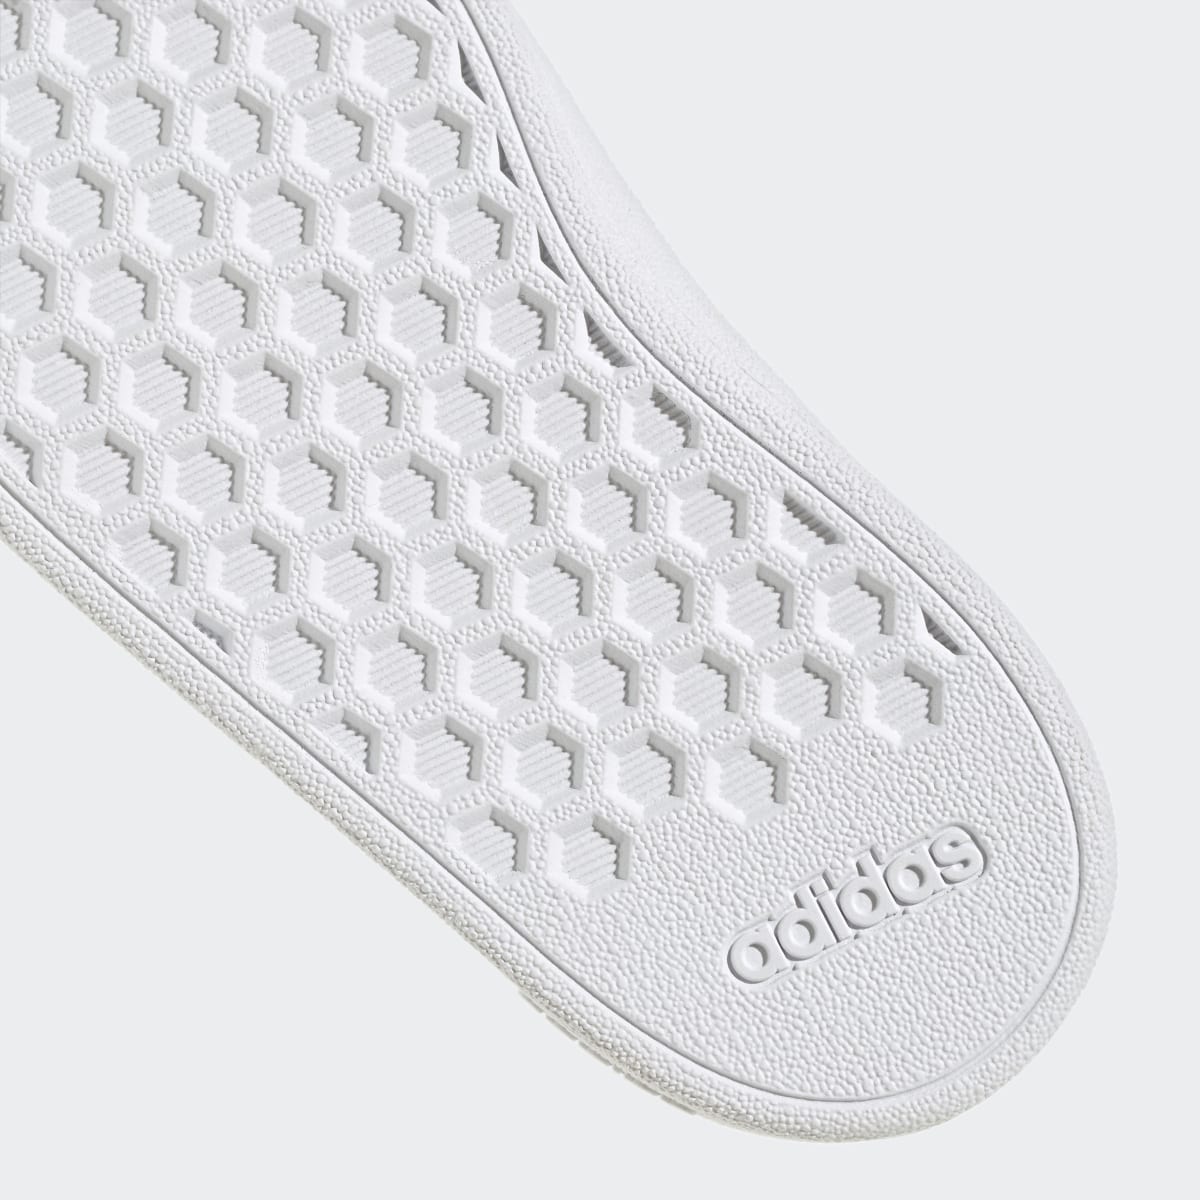 Adidas Grand Court Lifestyle Hook and Loop Shoes. 10